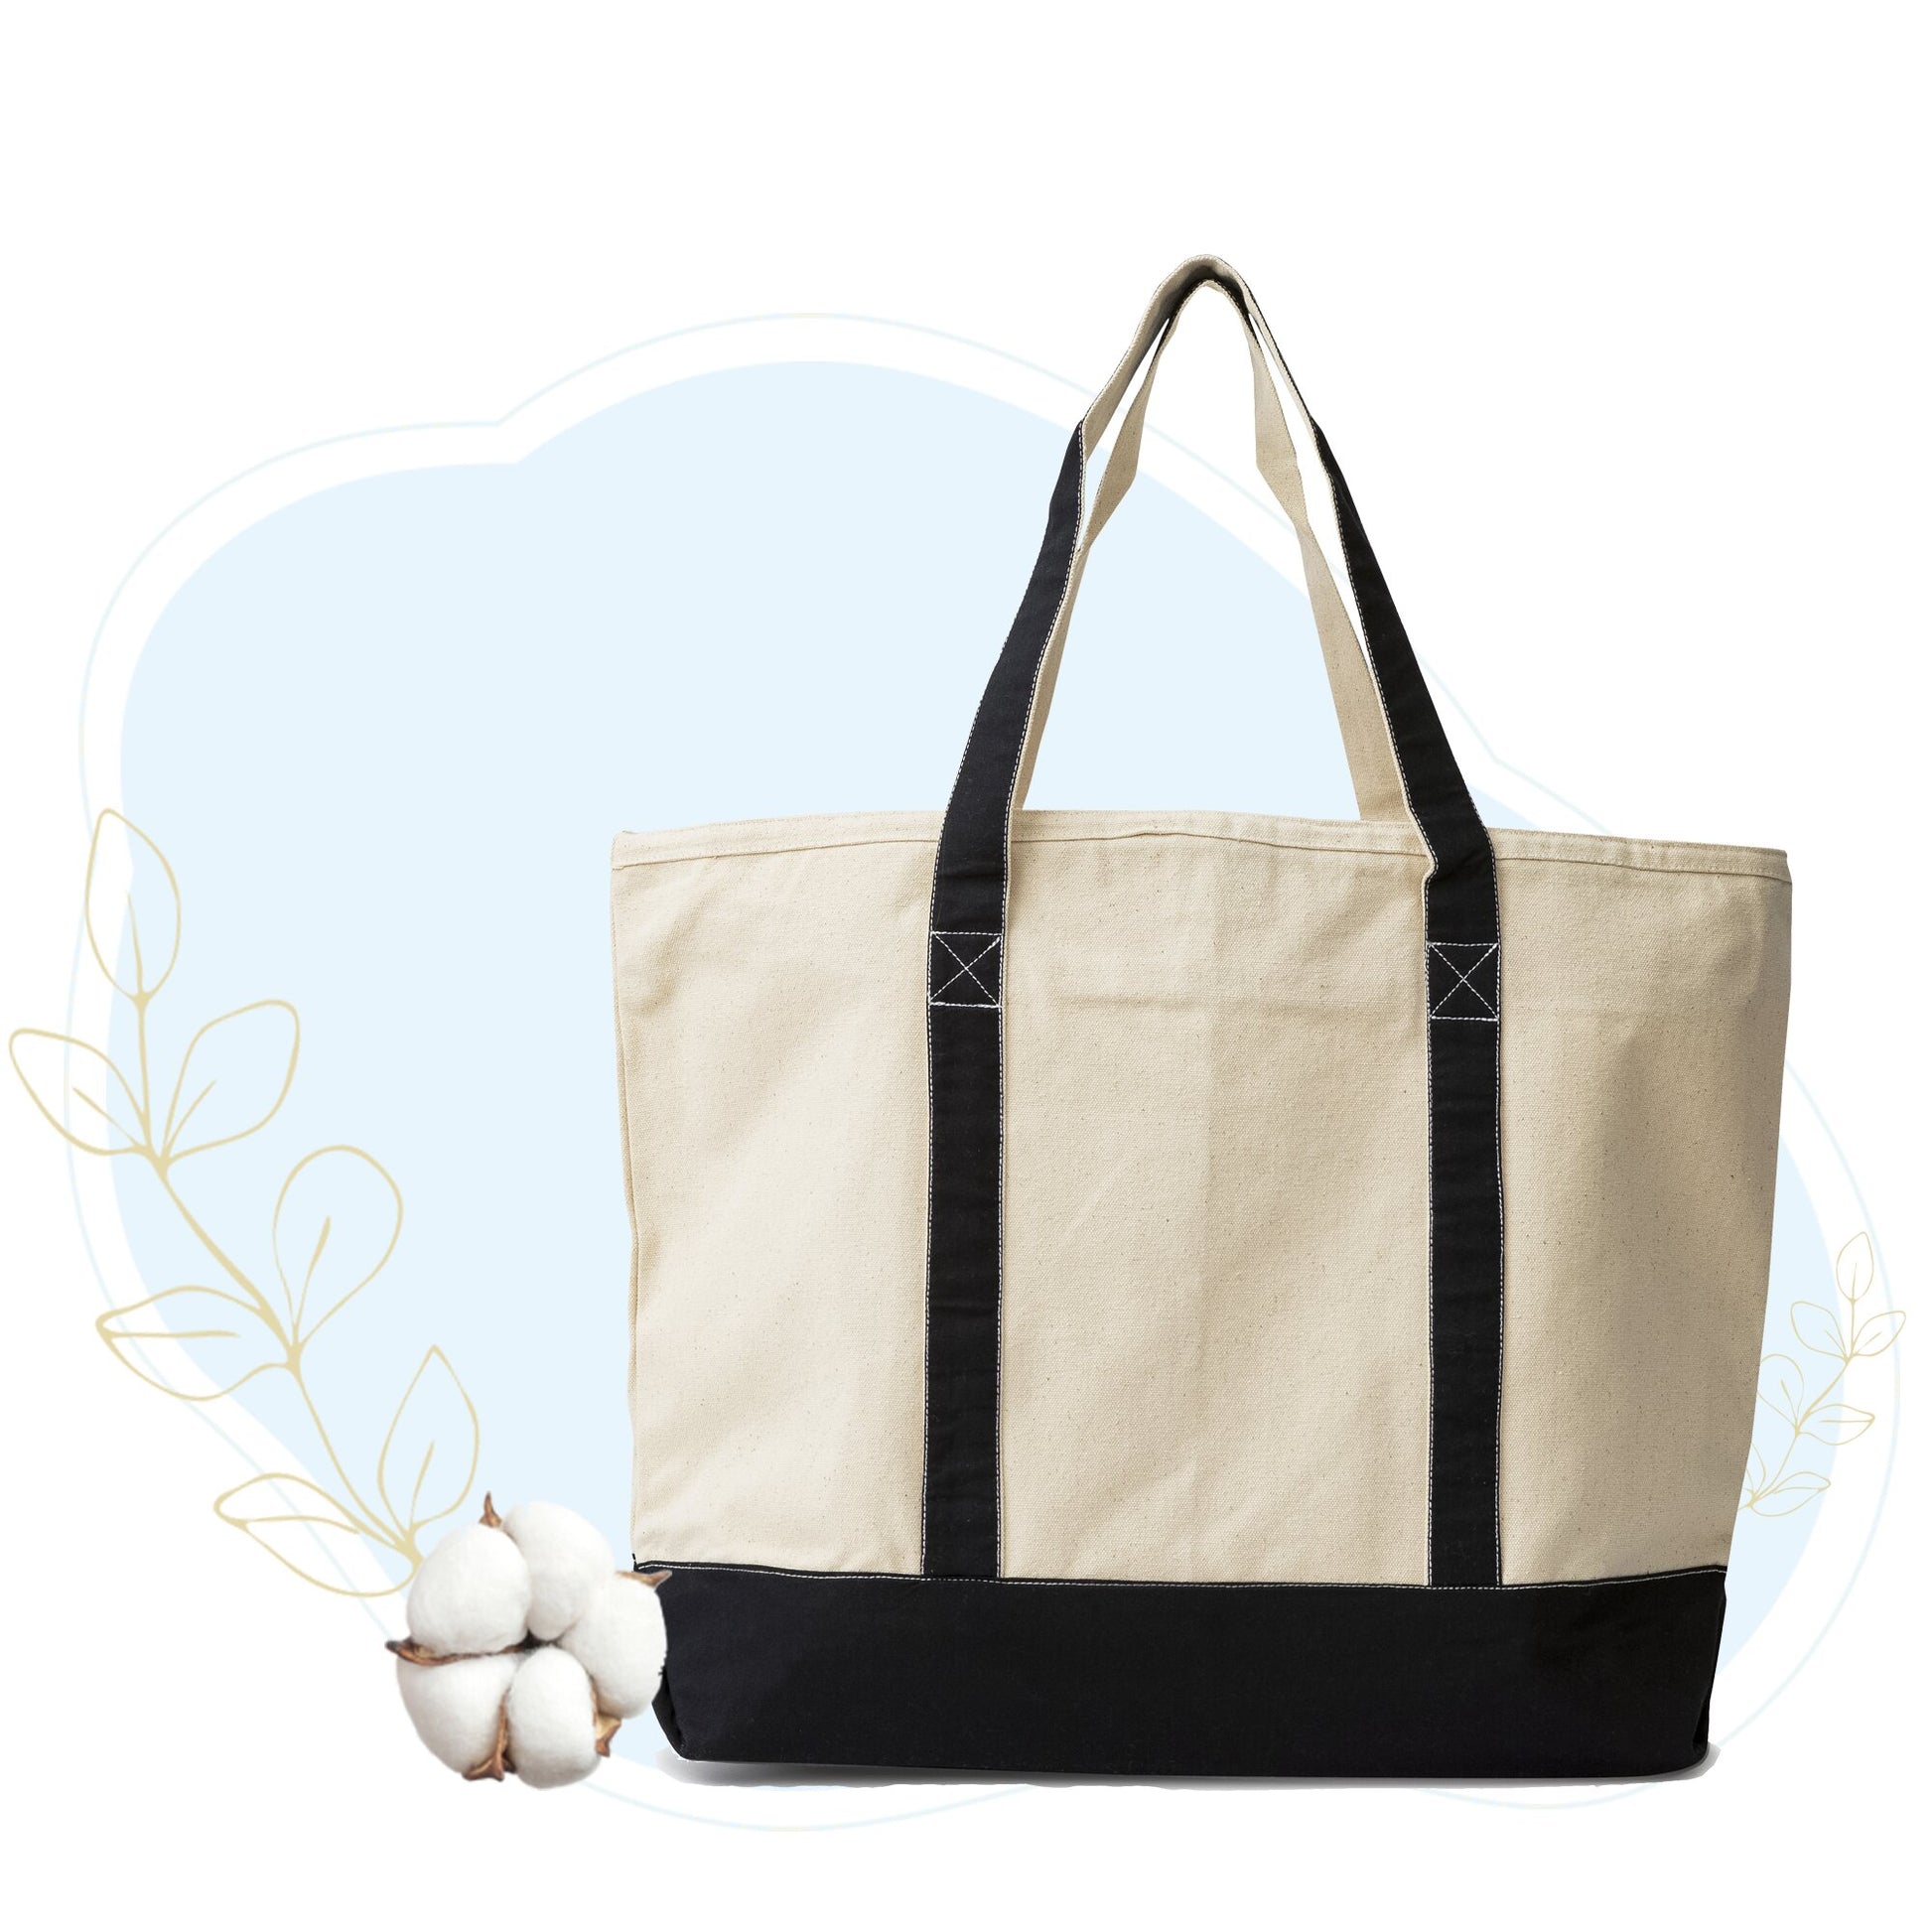 Extra Large Canvas Tote Black